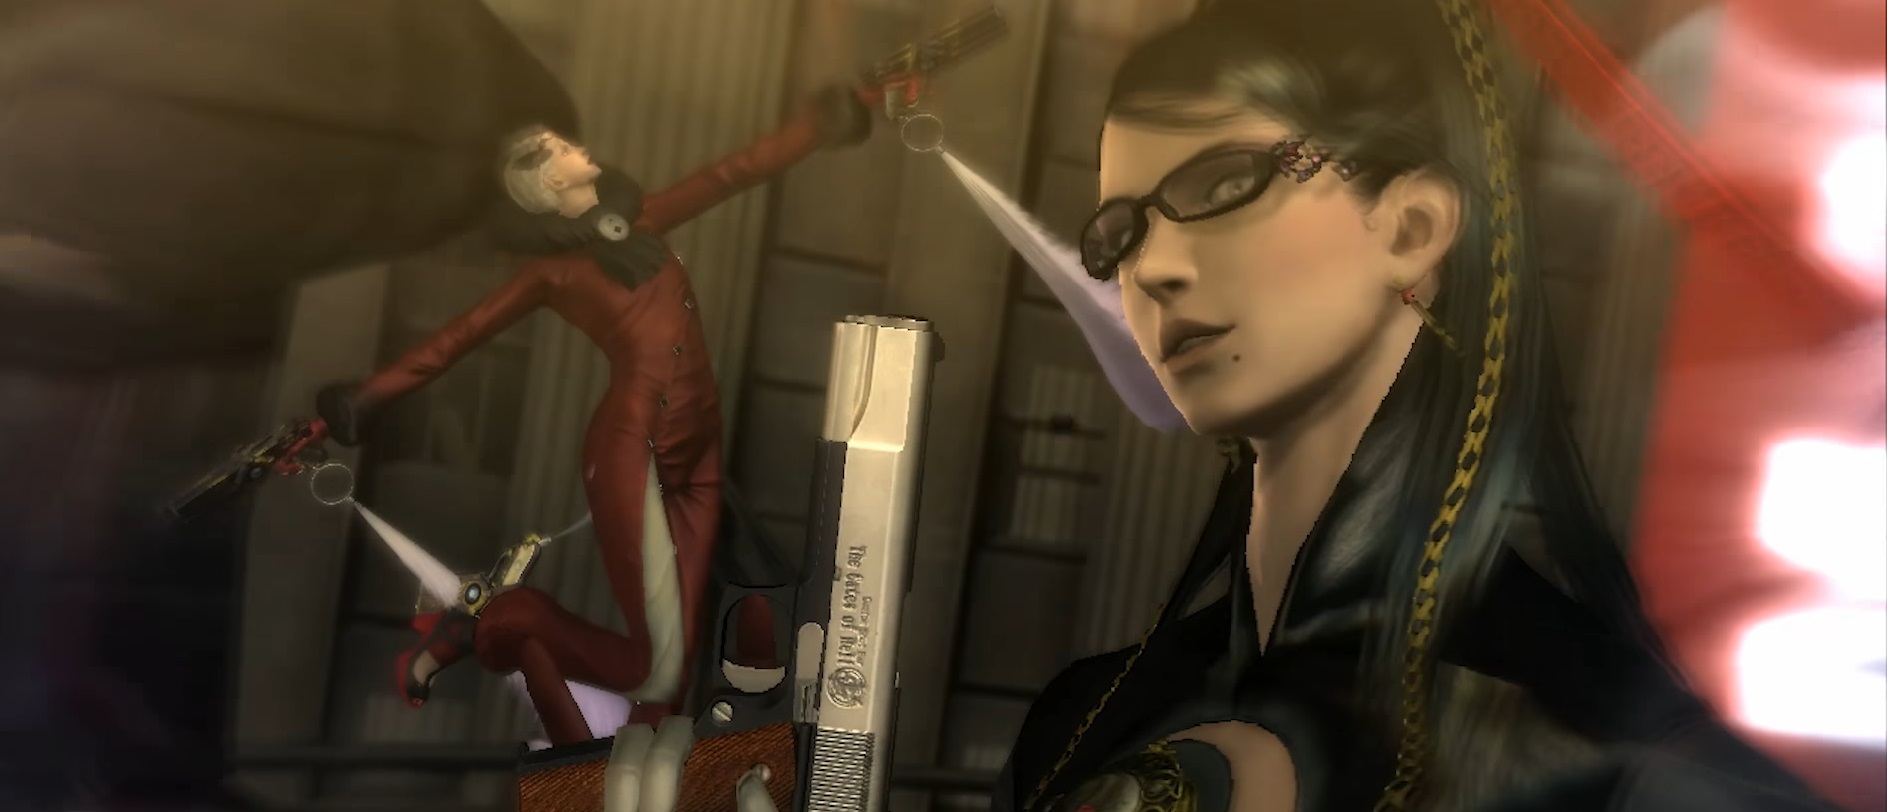 Nintendo Switch features and pricing detailed for Bayonetta 1 and 2 –  Destructoid